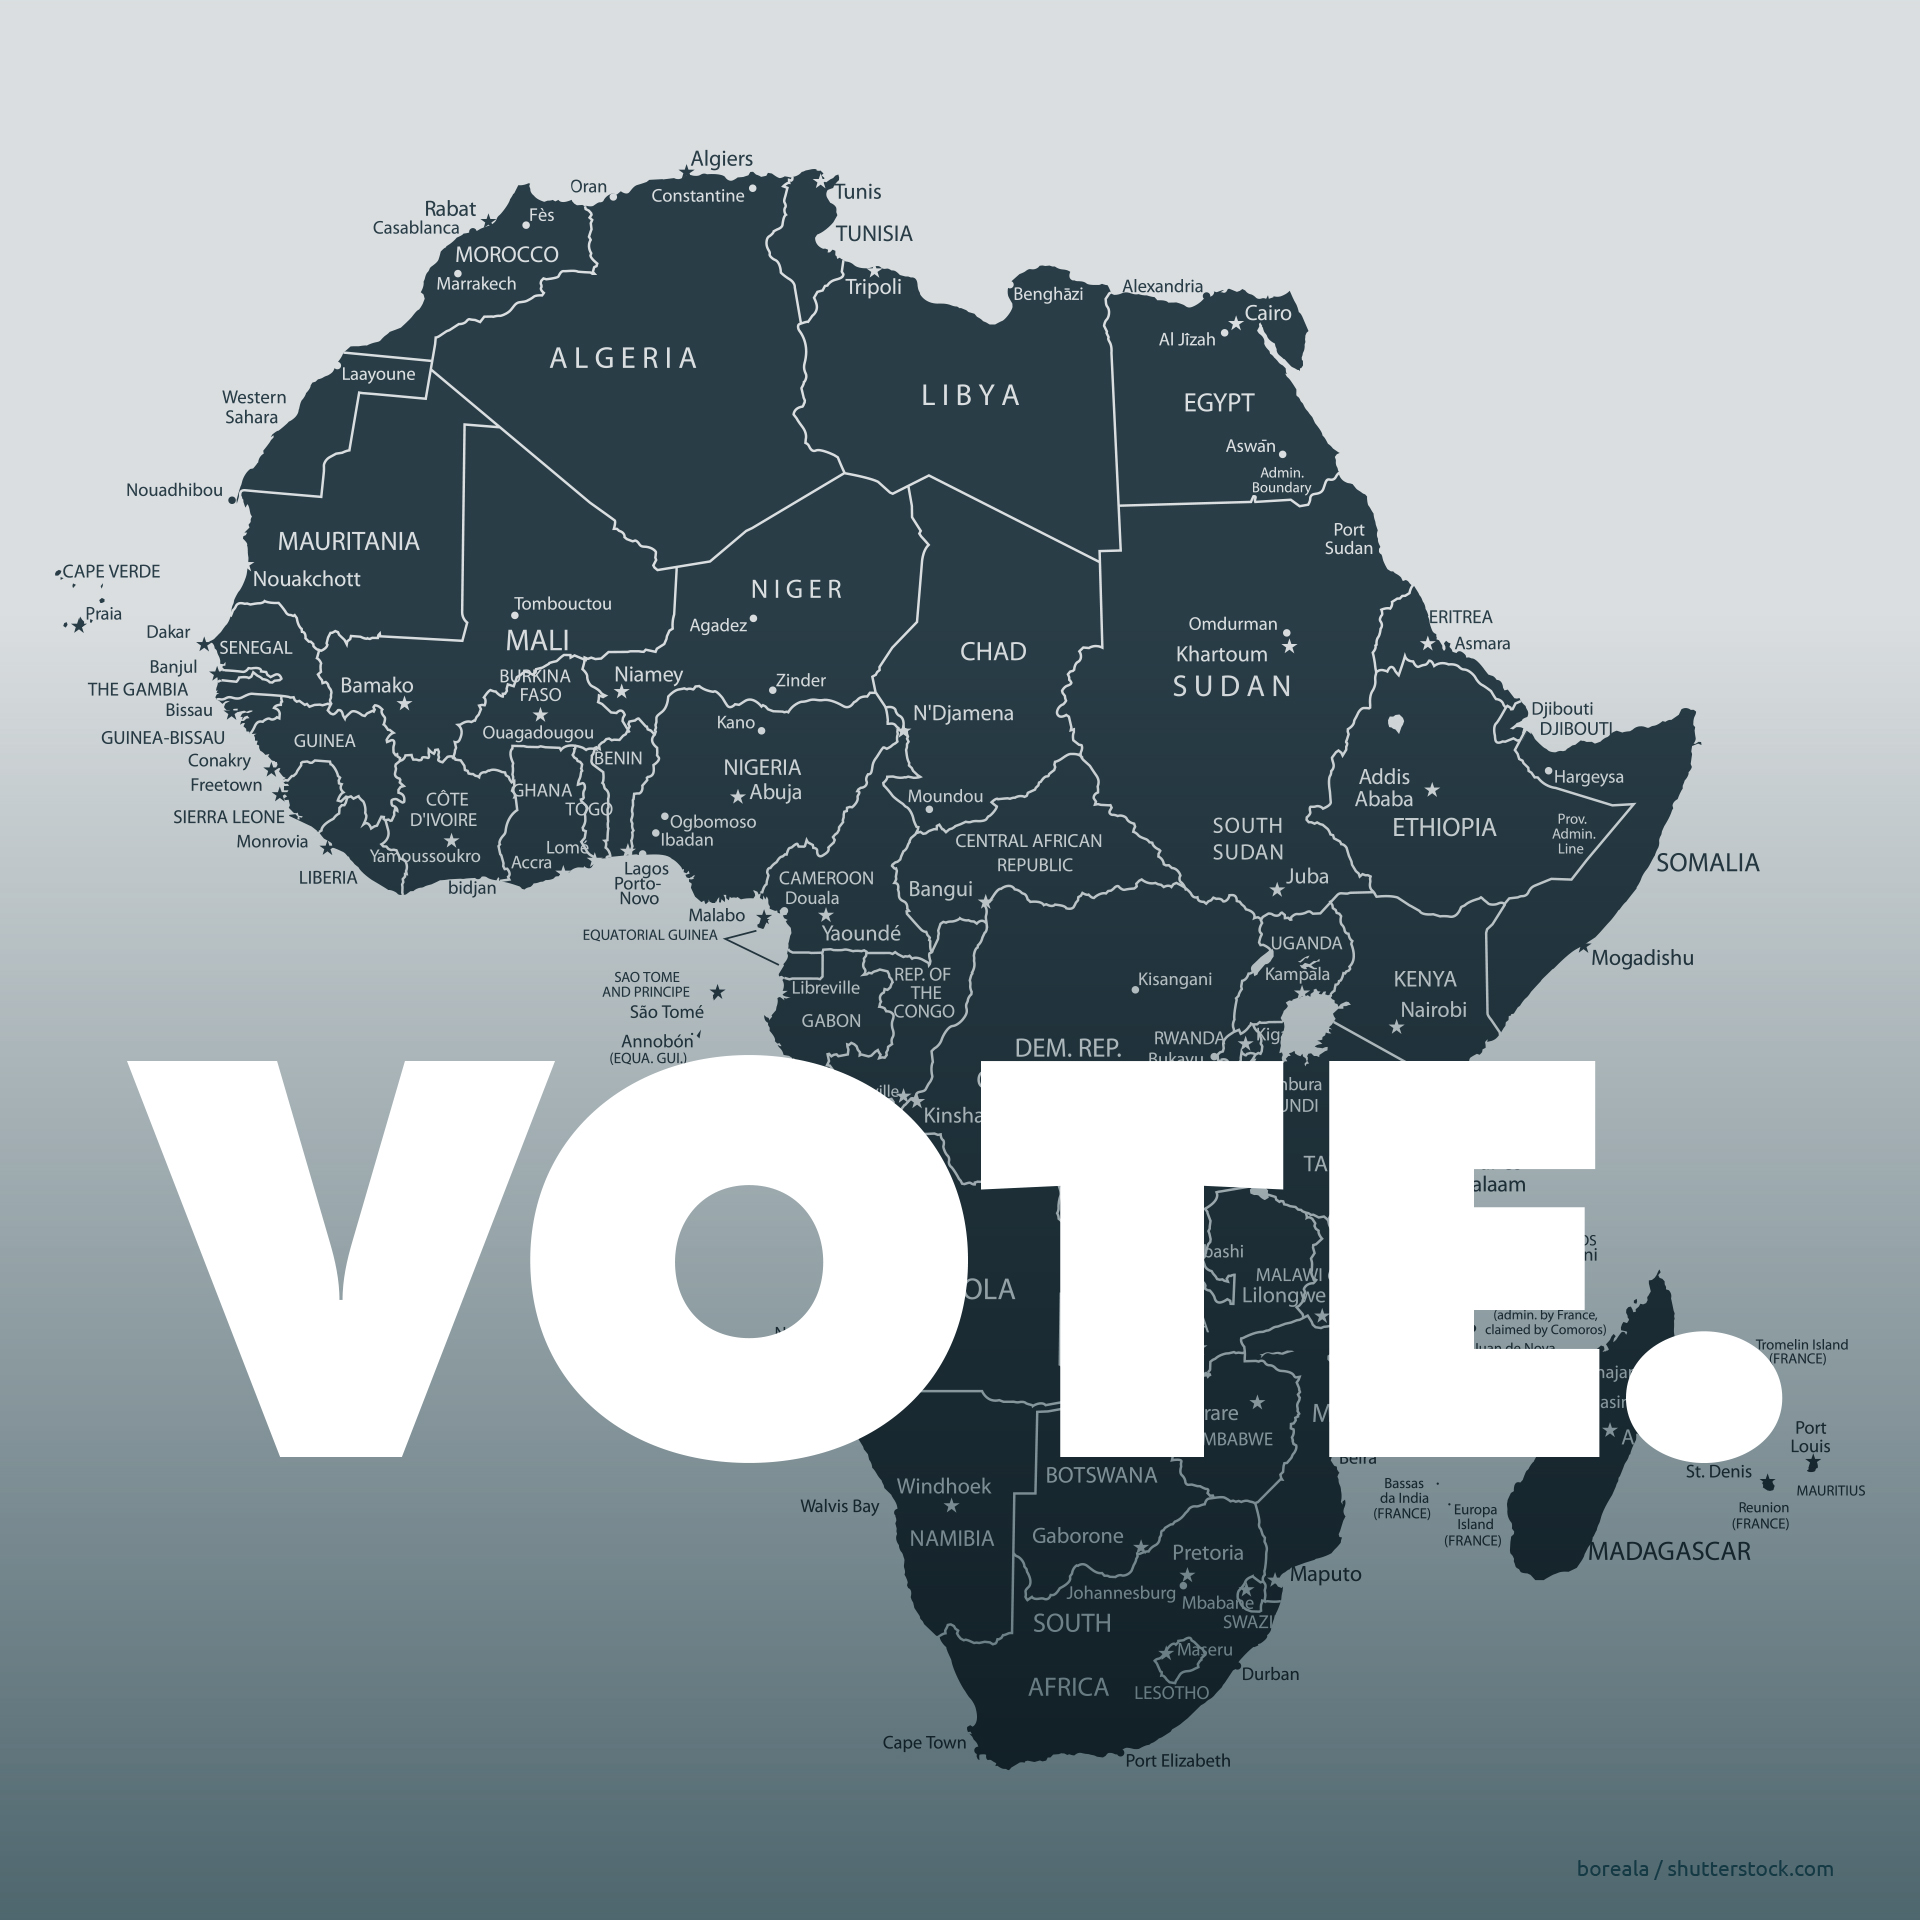 Uj Ipatc Africanyouth&elections Invite 30march2022 Ujweb 1920x1920pxls